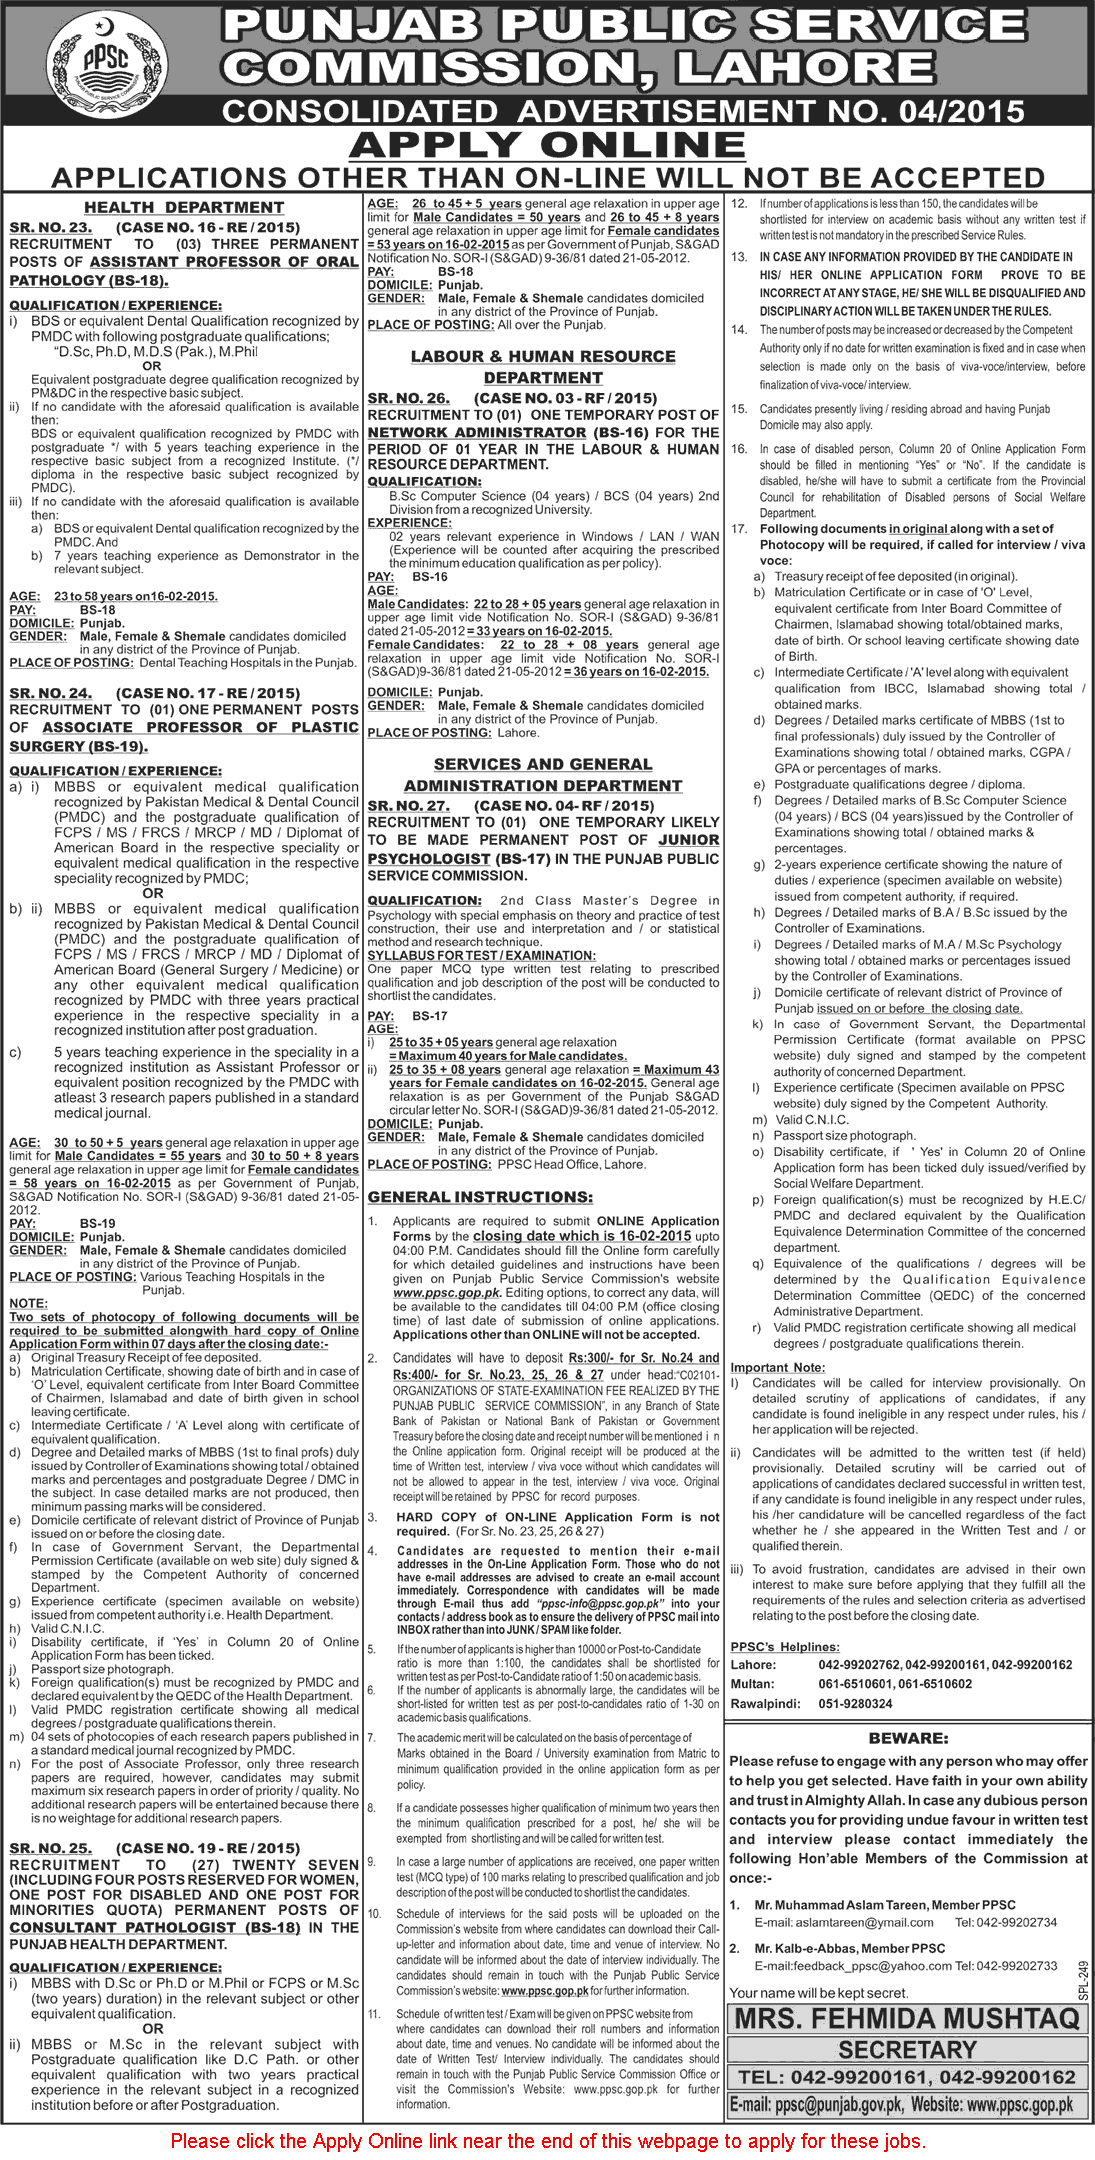 PPSC Jobs 2015 Apply Online Consolidated Advertisement 04/2015 (4)